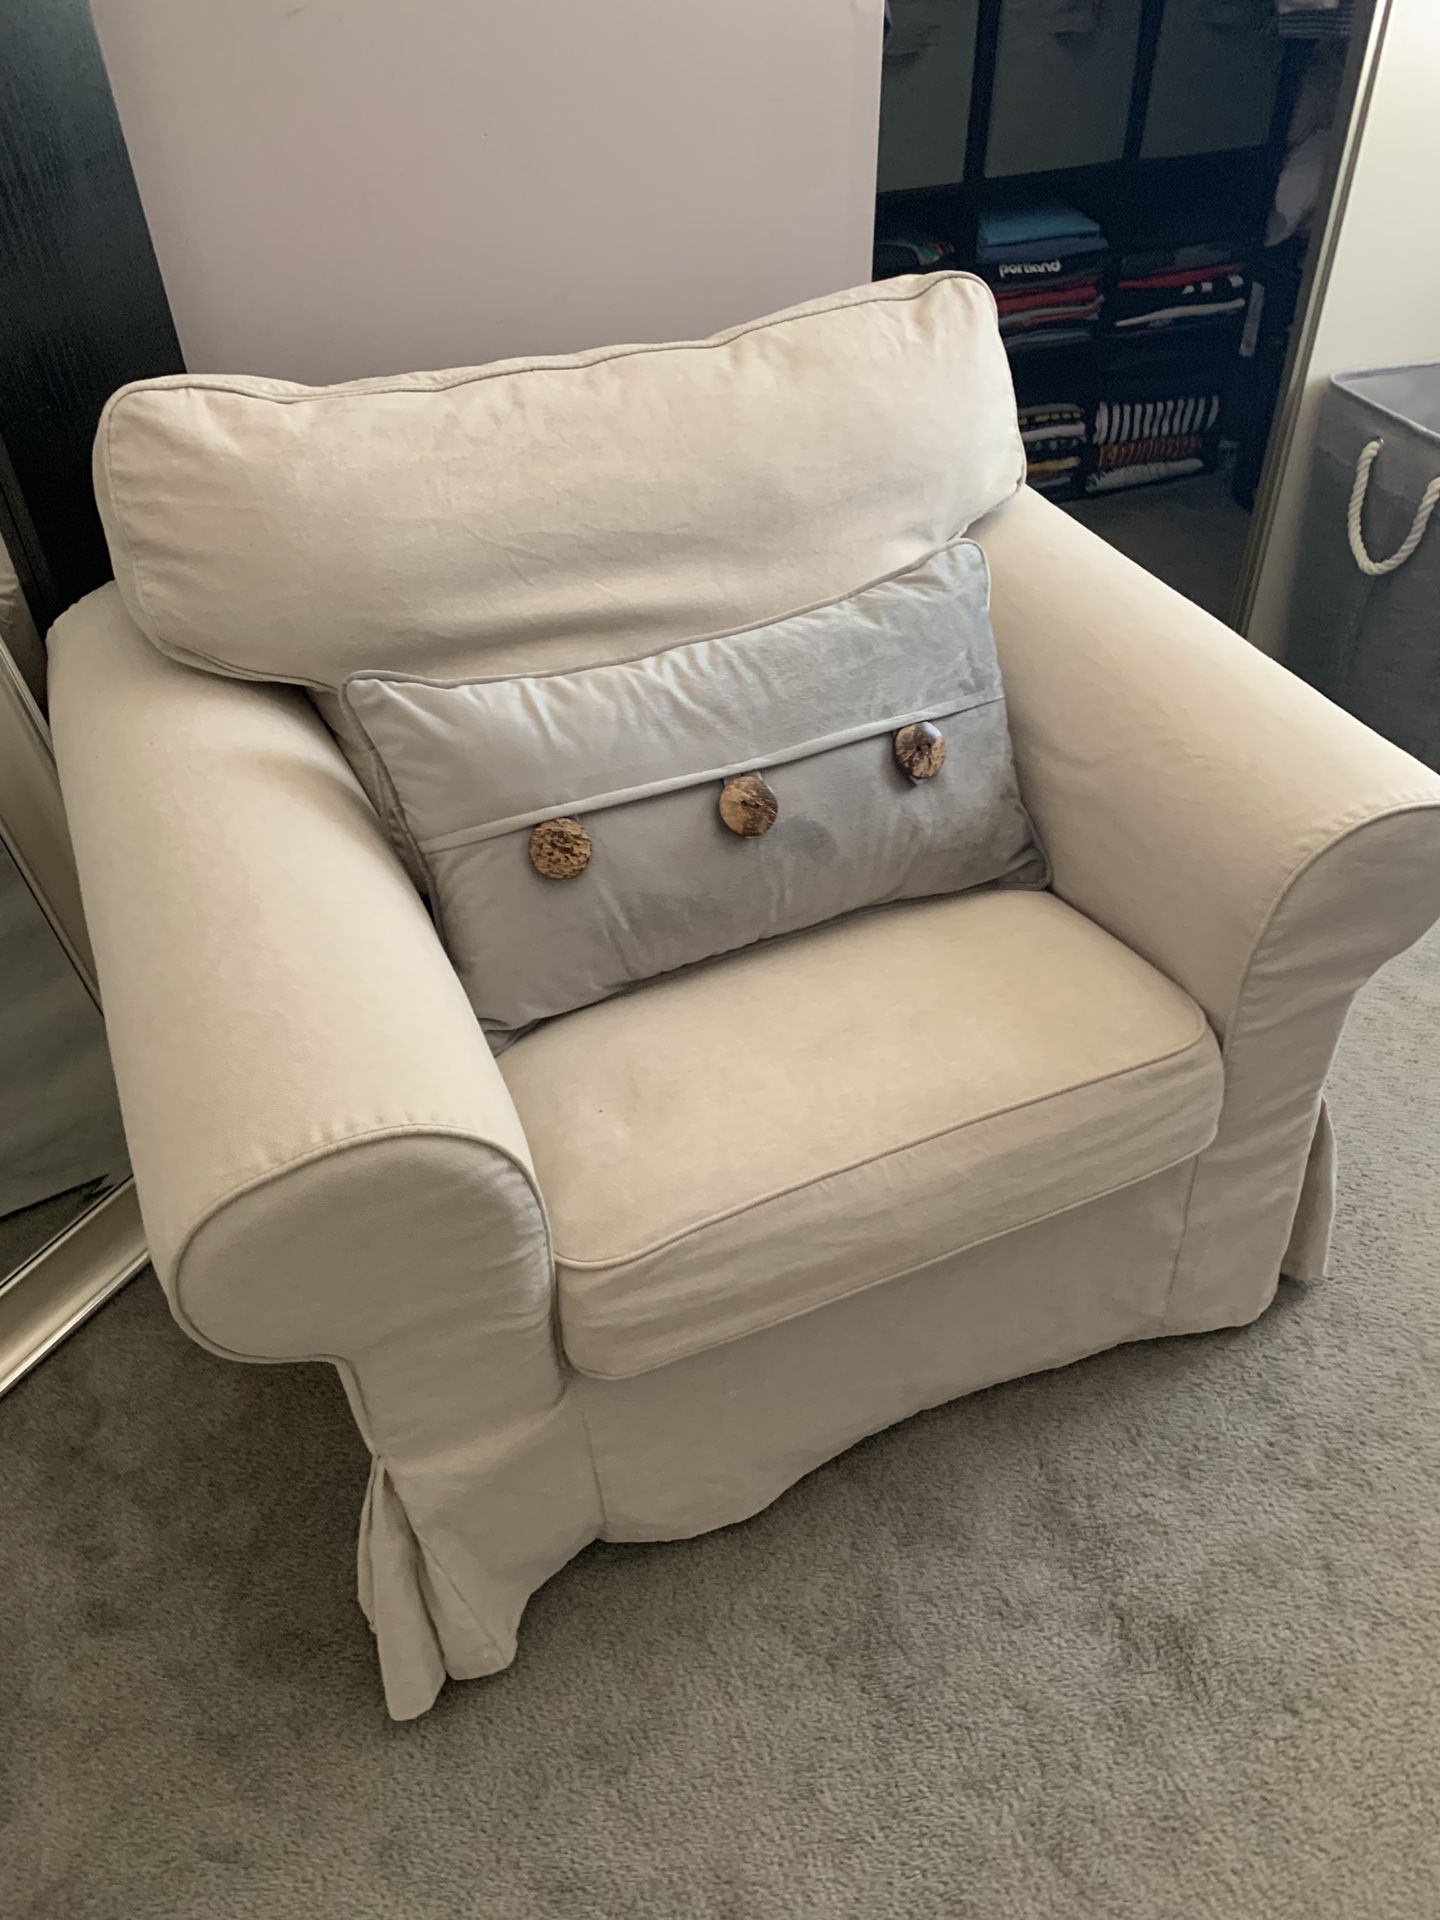 Ikea chair with beige cover